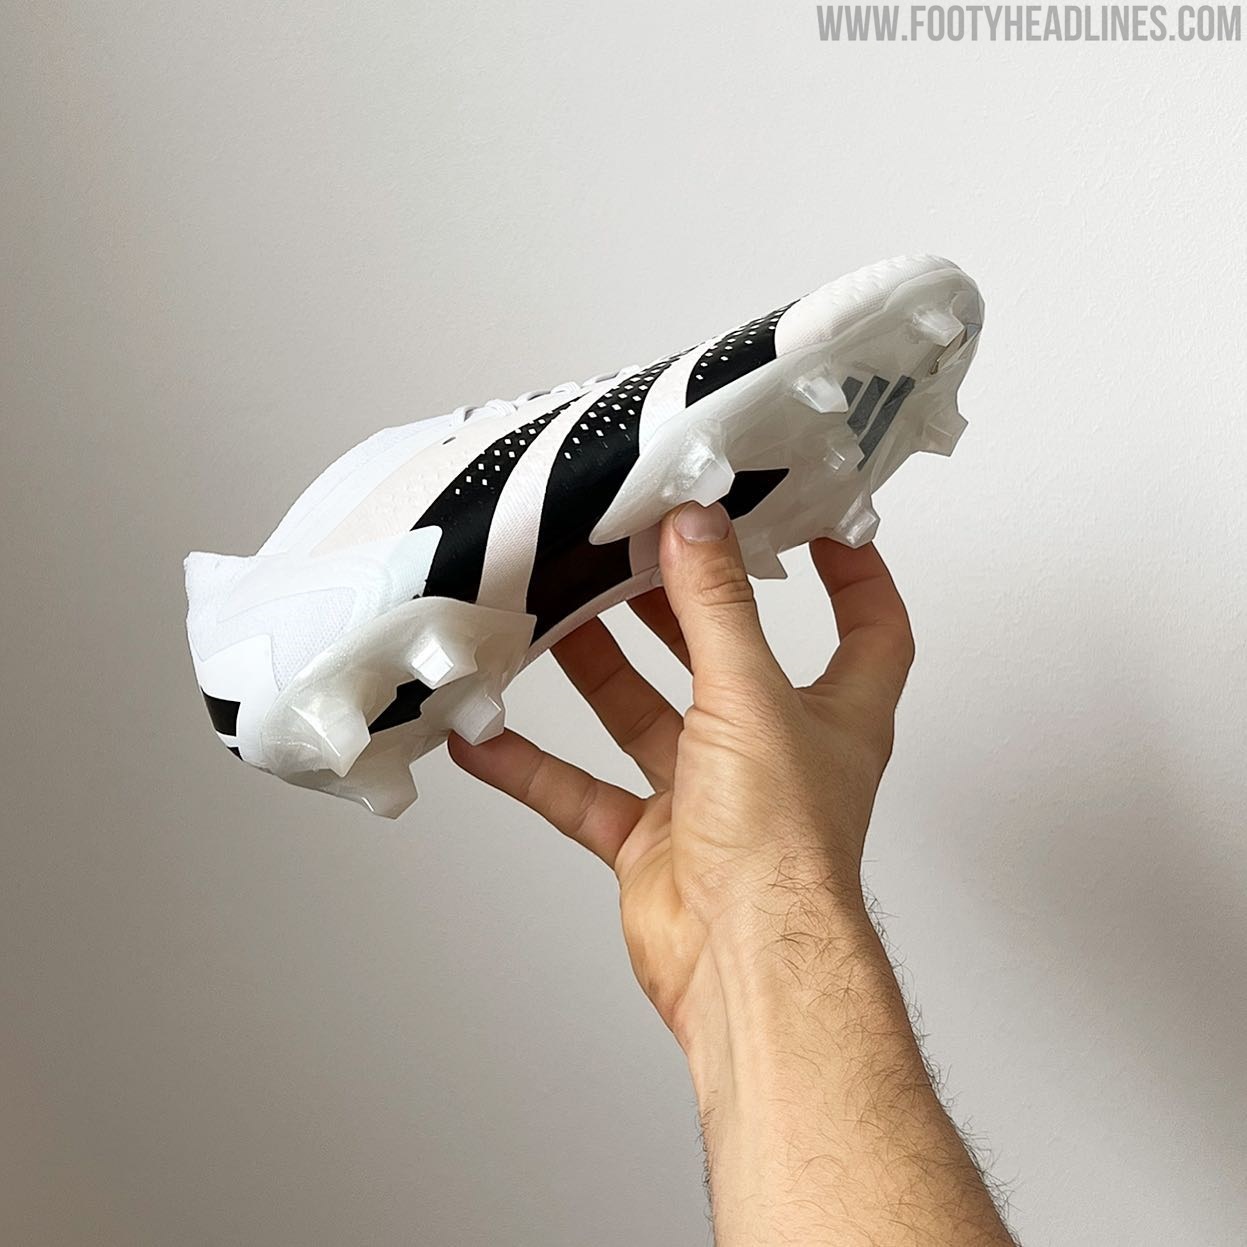 Bad News: Popular White/Black Adidas Predator World Cup' Boots Will Never Be Released - Headlines